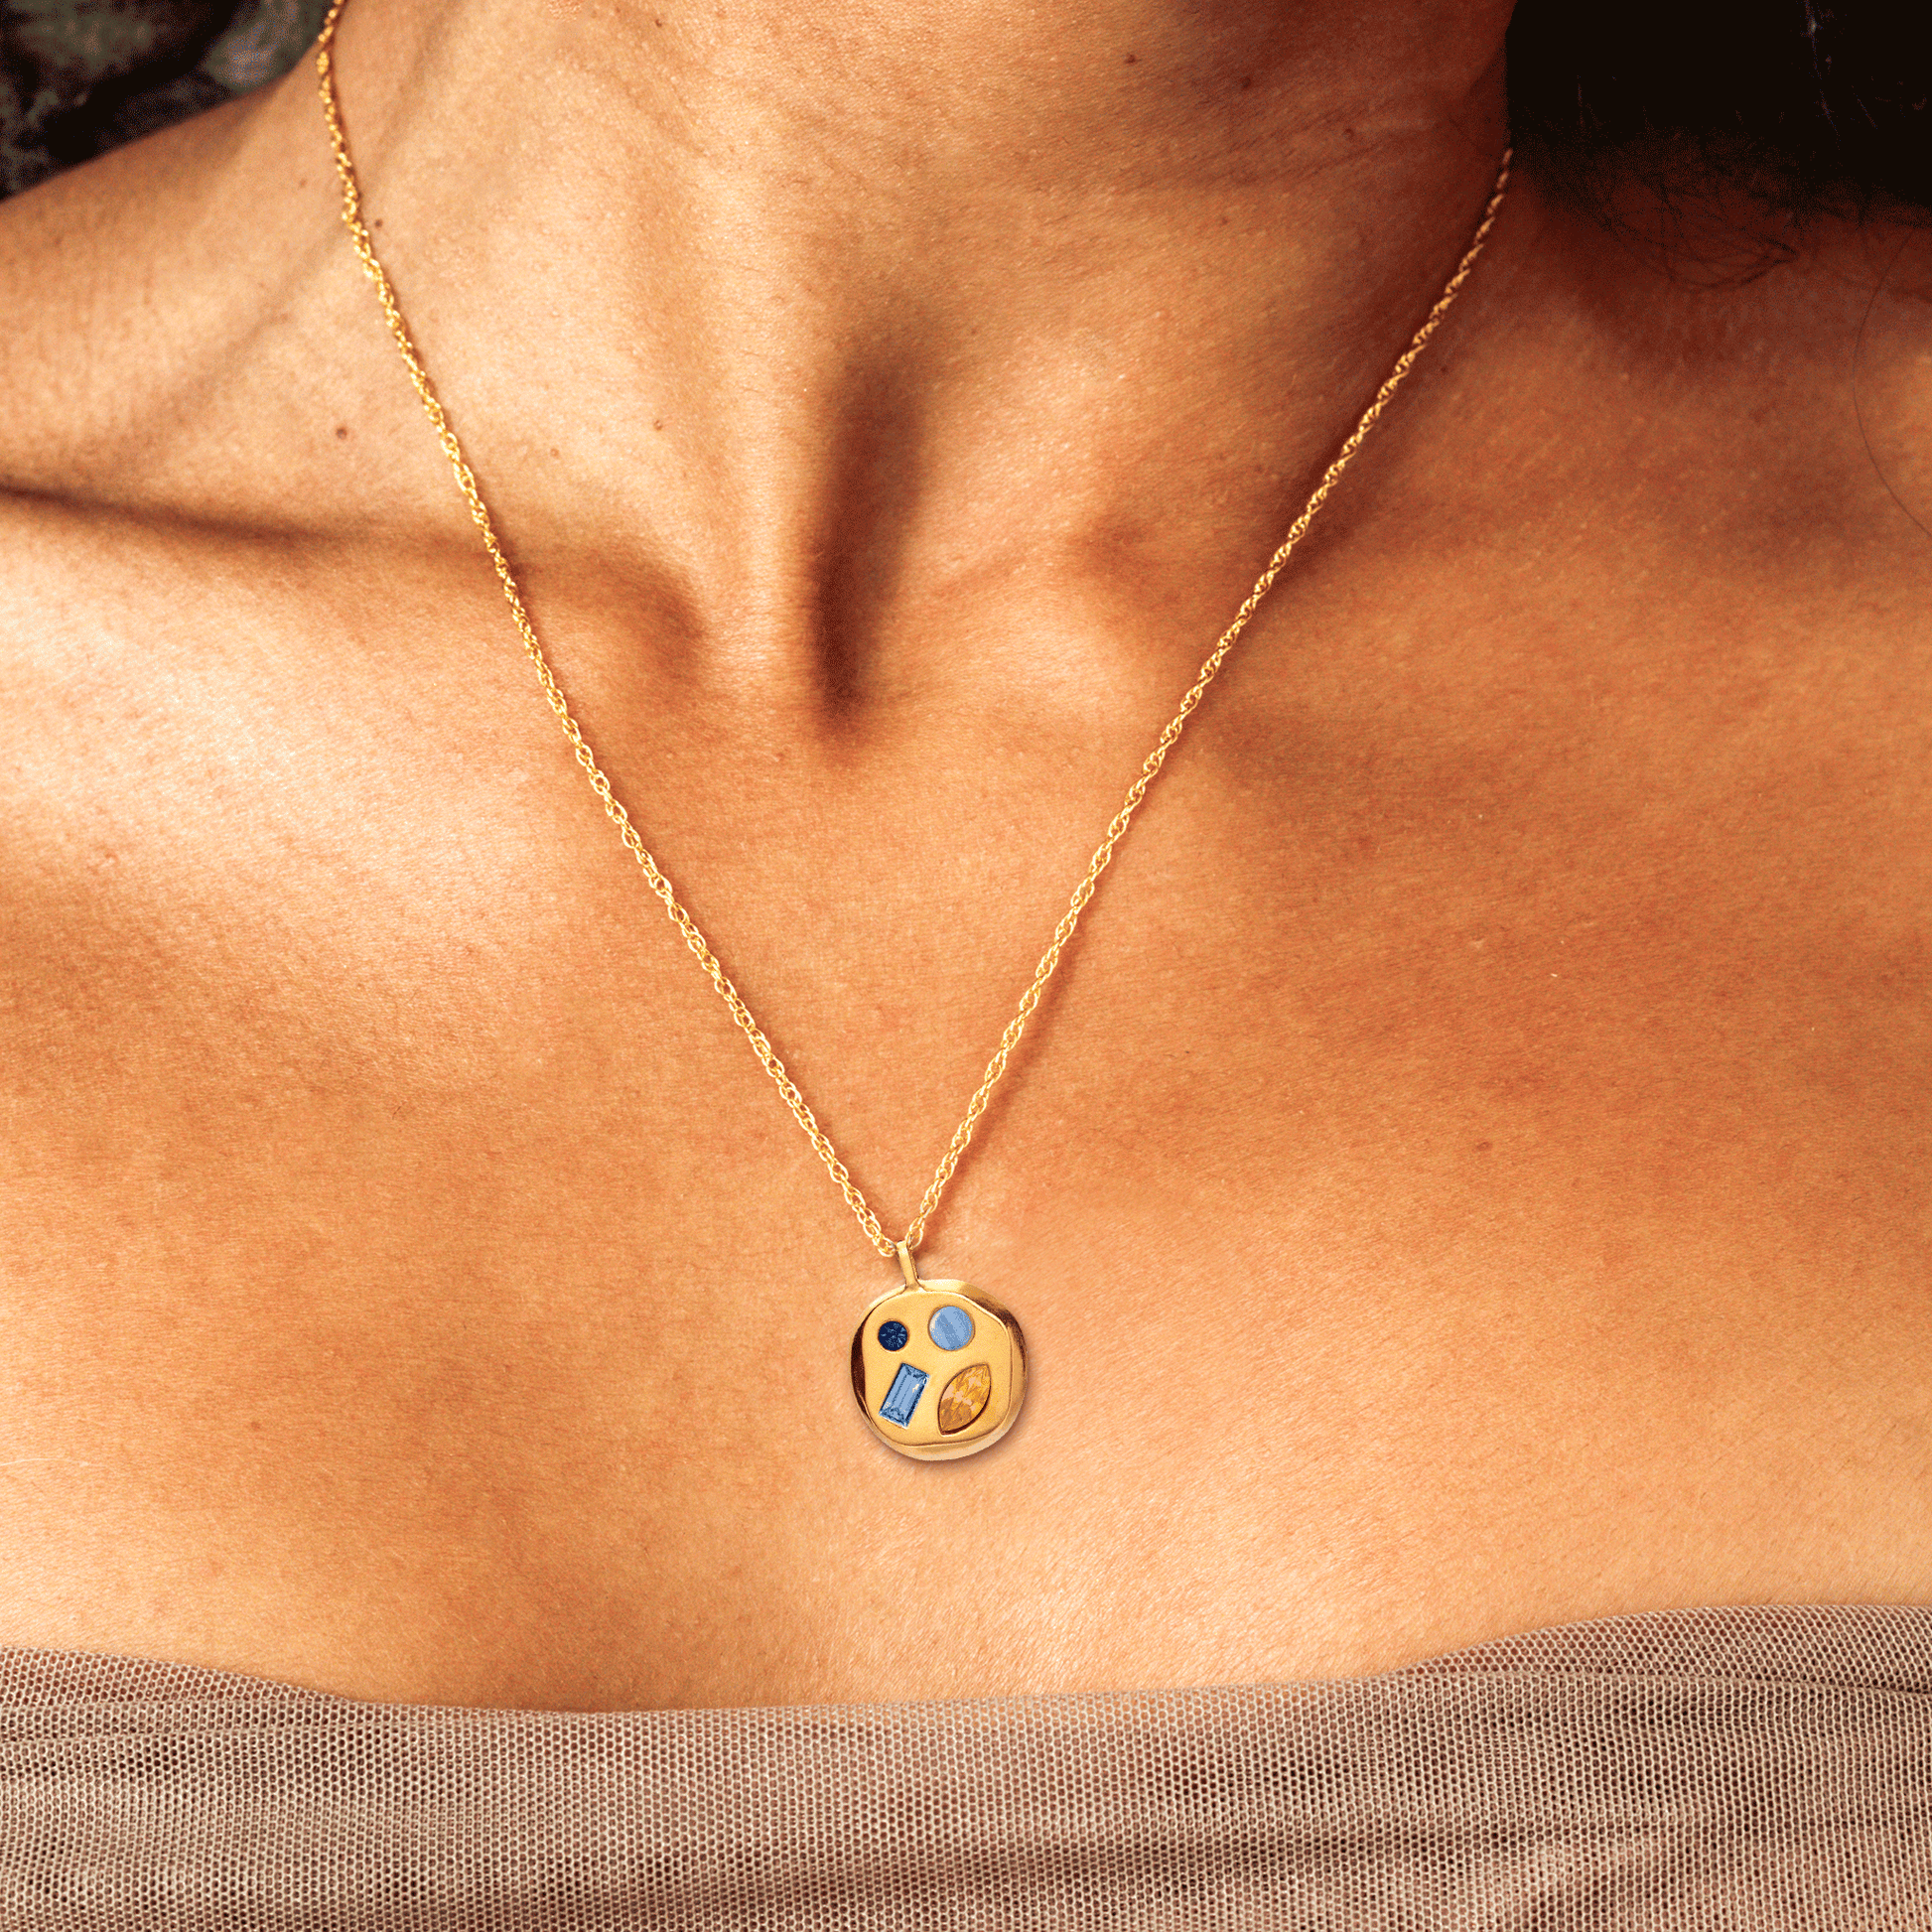 Person wearing The November Seventh Pendant